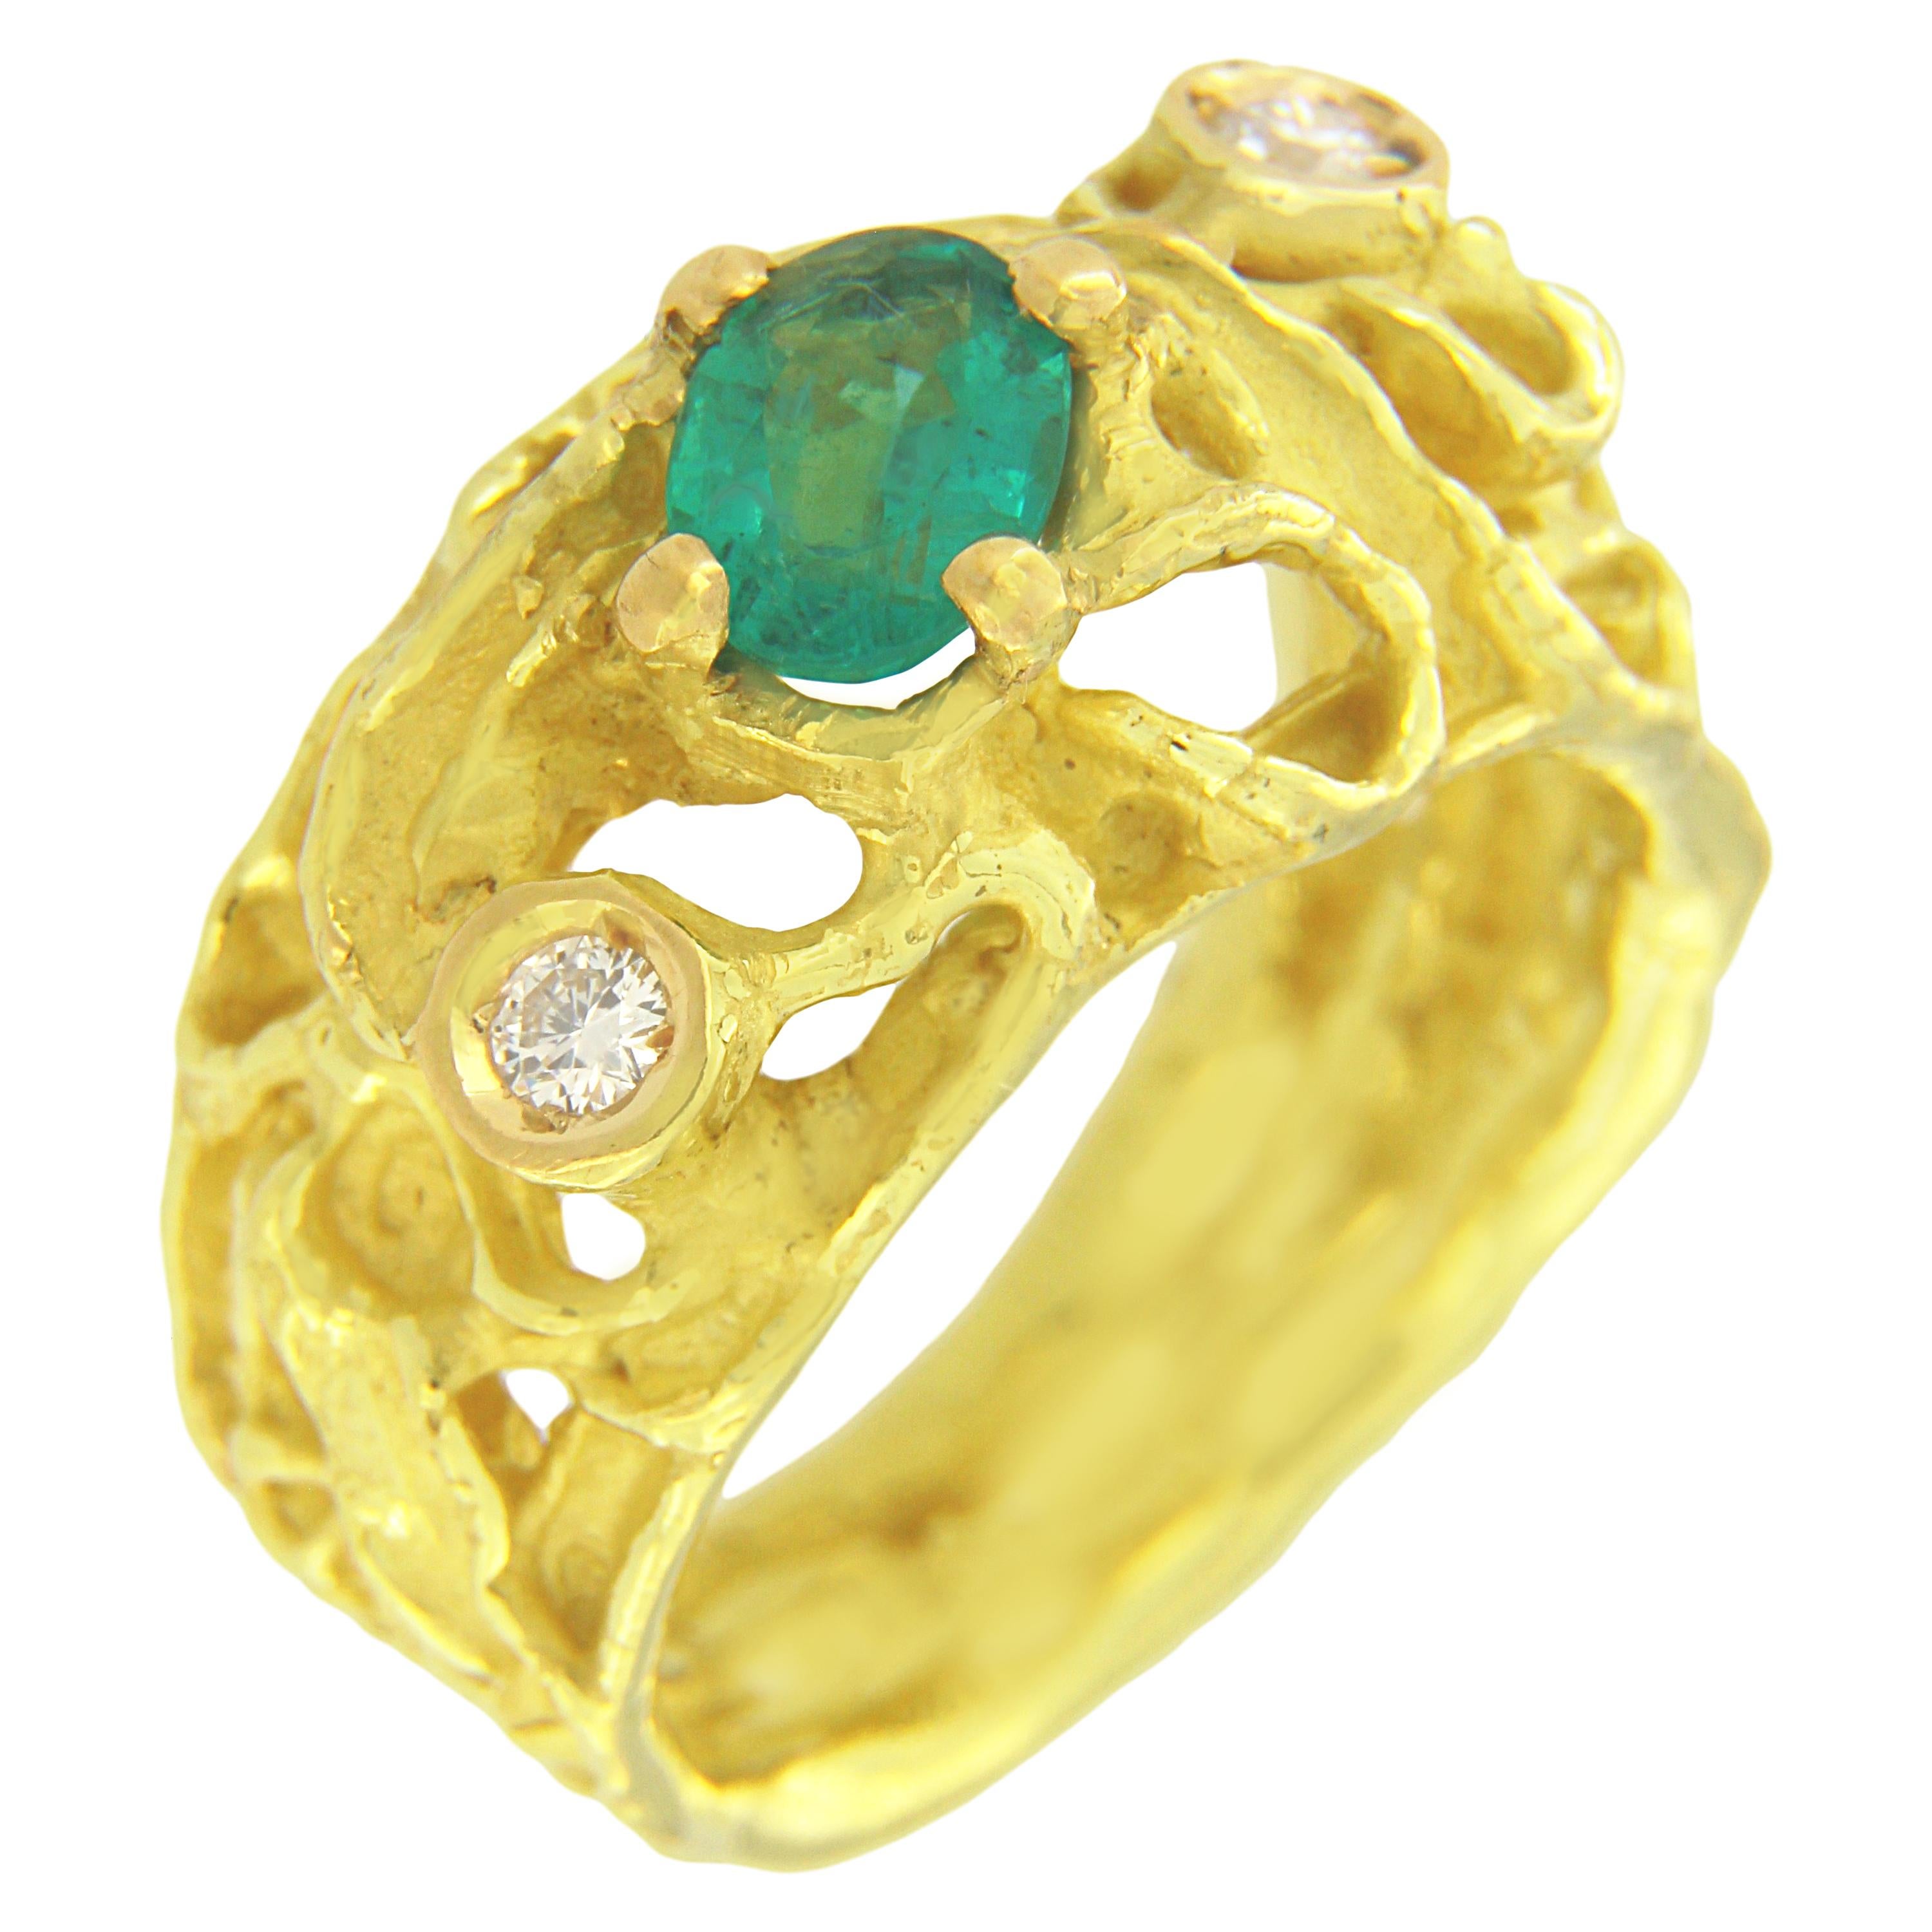 Oval Emerald and Diamonds Satin Yellow Gold Cocktail Ring, from Sacchi’s Abstract Collection, hand-crafted with lost-wax casting technique.

Lost-wax casting, one of the oldest techniques for creating jewelry, forms the basis of Sacchi's jewelry